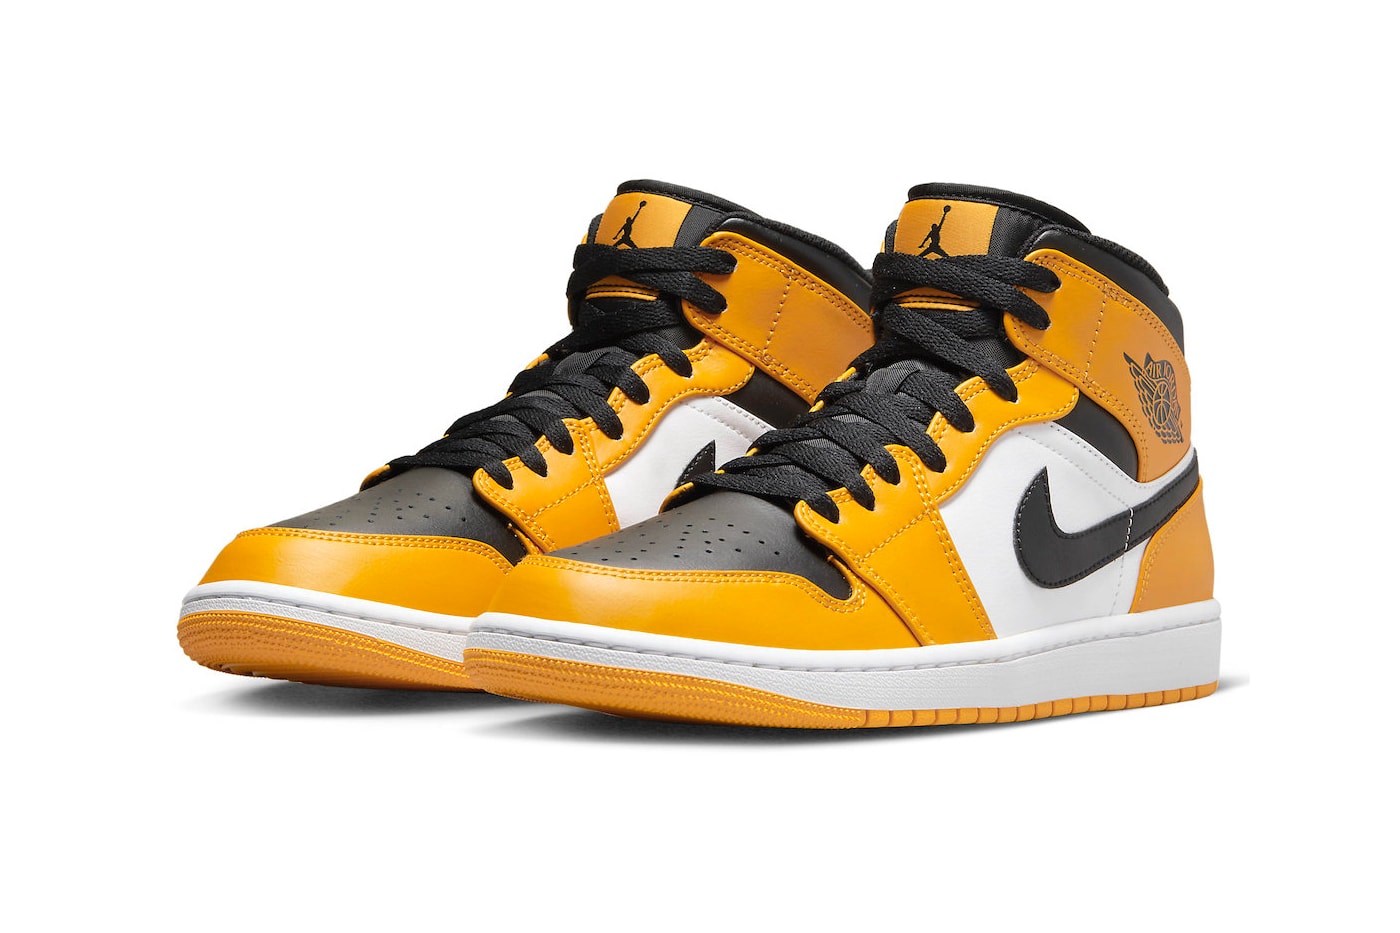 Air Jordan 1 Mid Flipped Yellow Toe Official Look Release Info 554724-701 Date Buy Price 